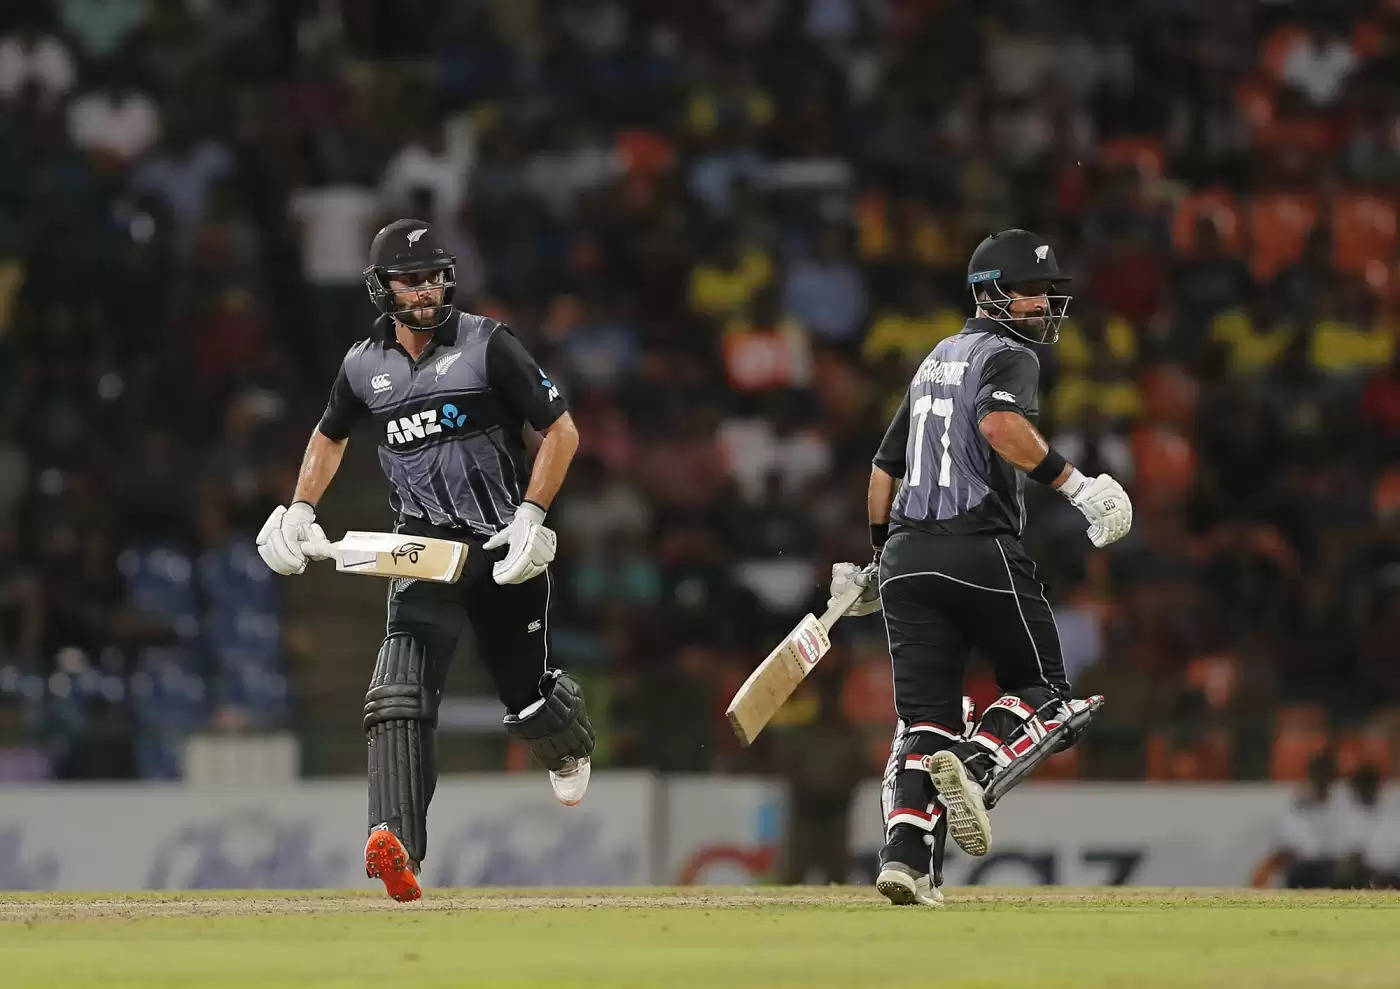 NZ vs ENG, 2nd T20I: New Zealand catch England out with de Grandhomme”s safe hands